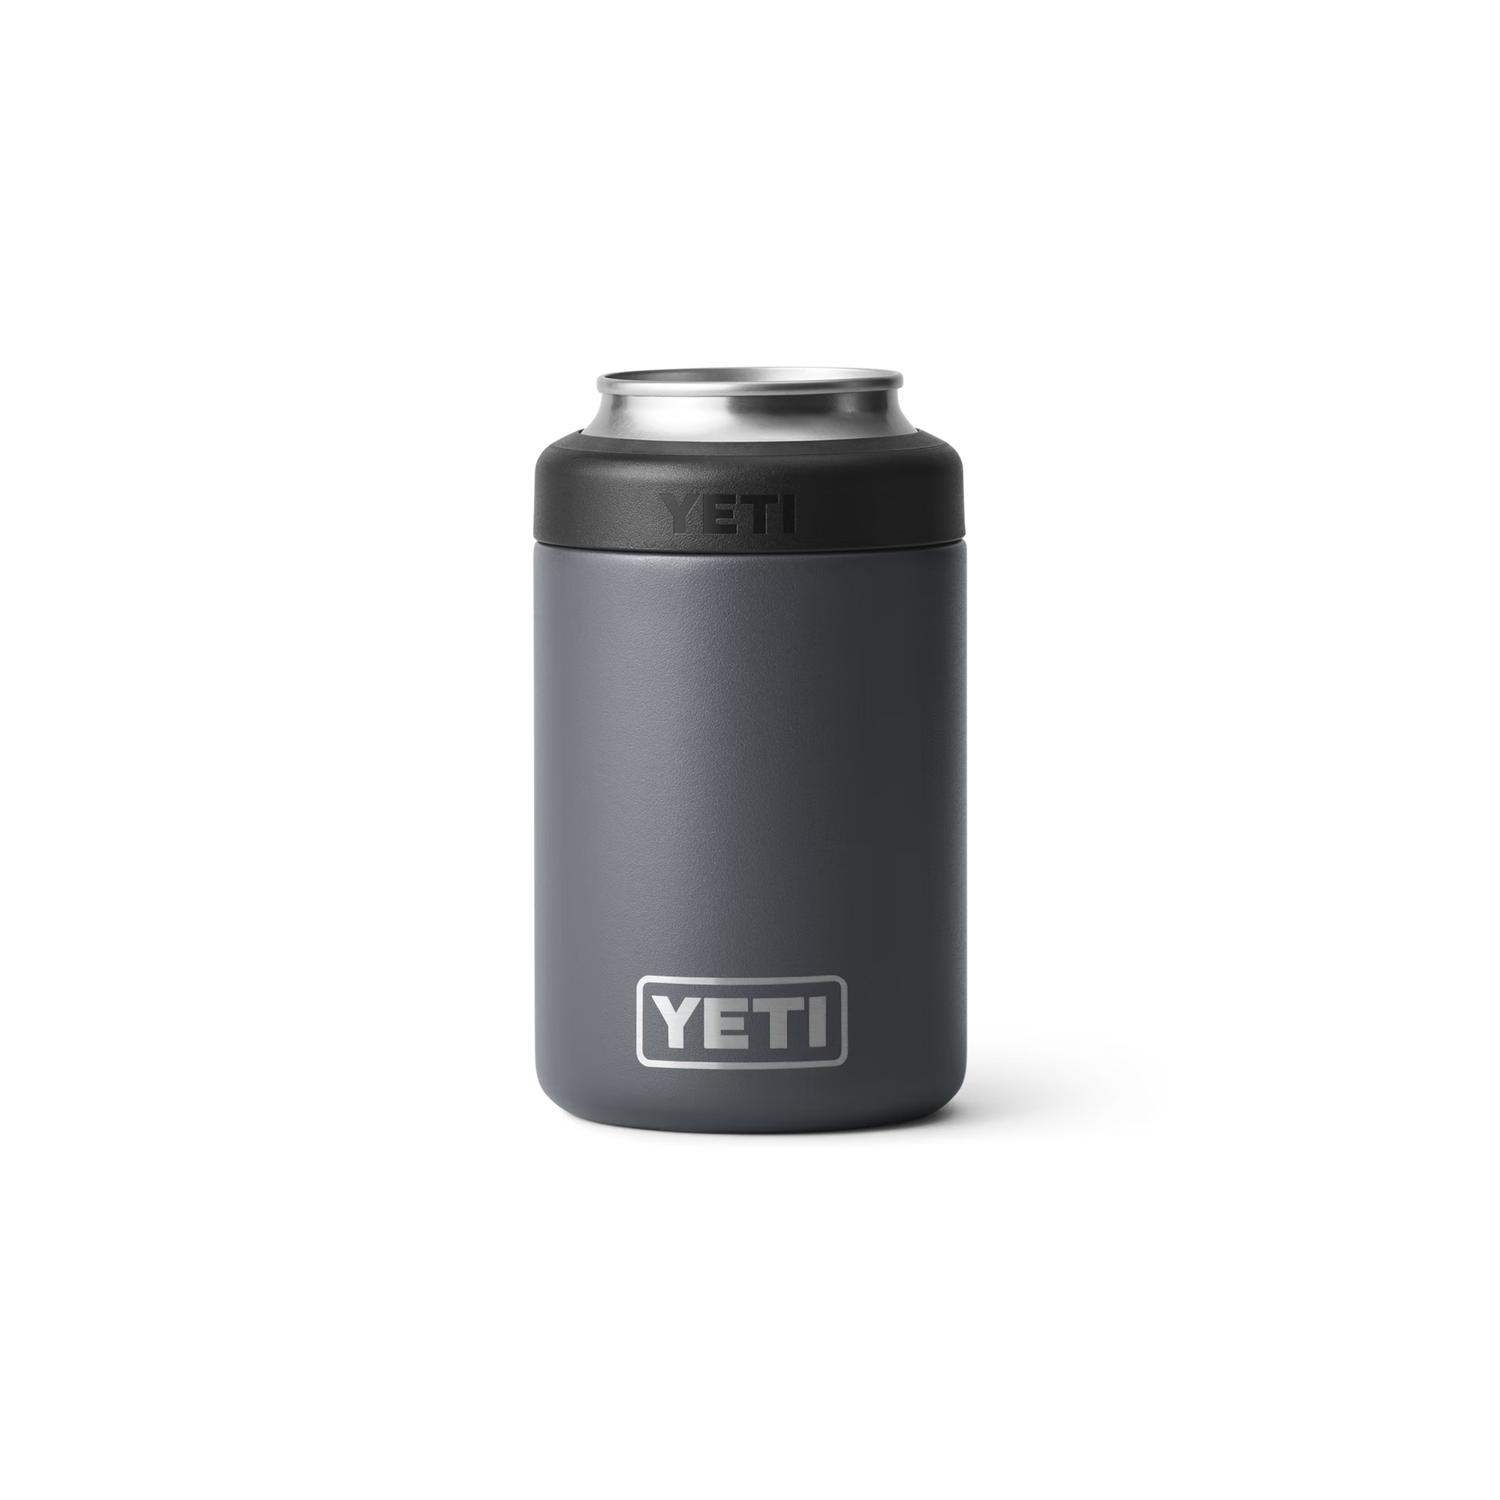 YETI Stainless Steel Tumbler Laser Engraved 20 or 30 Oz., Colsters